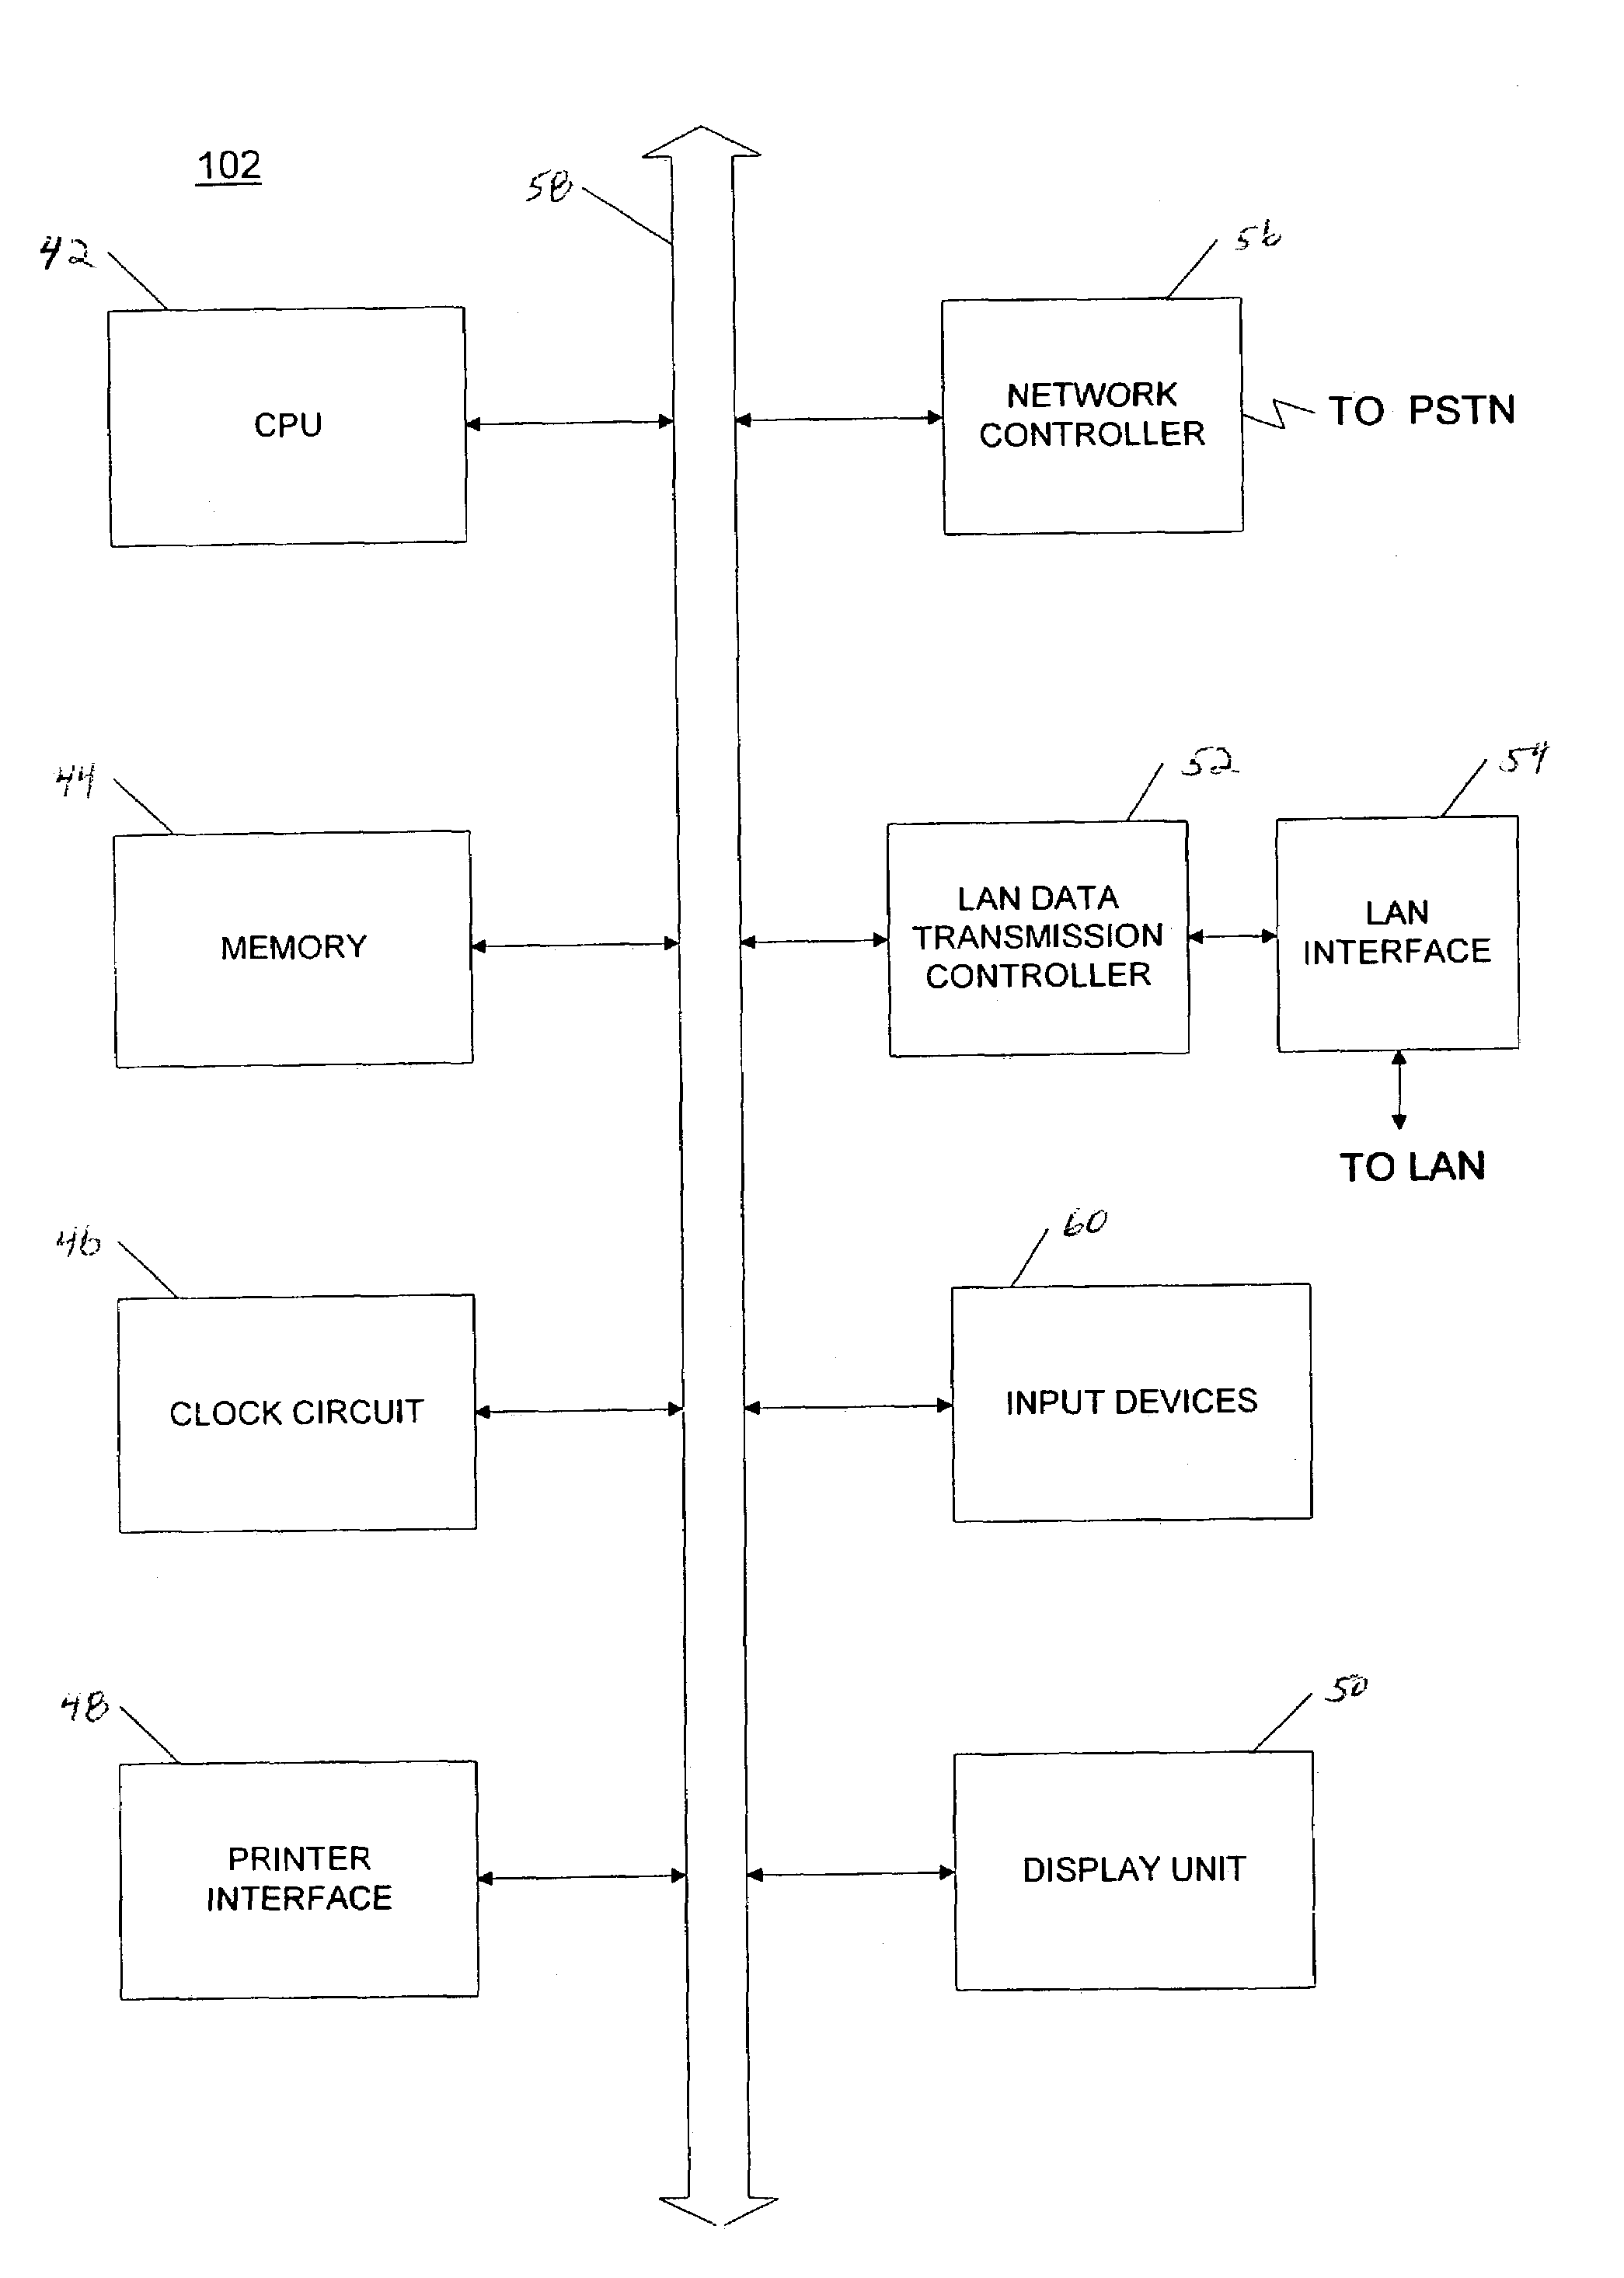 System and method for computer virus detection utilizing heuristic analysis